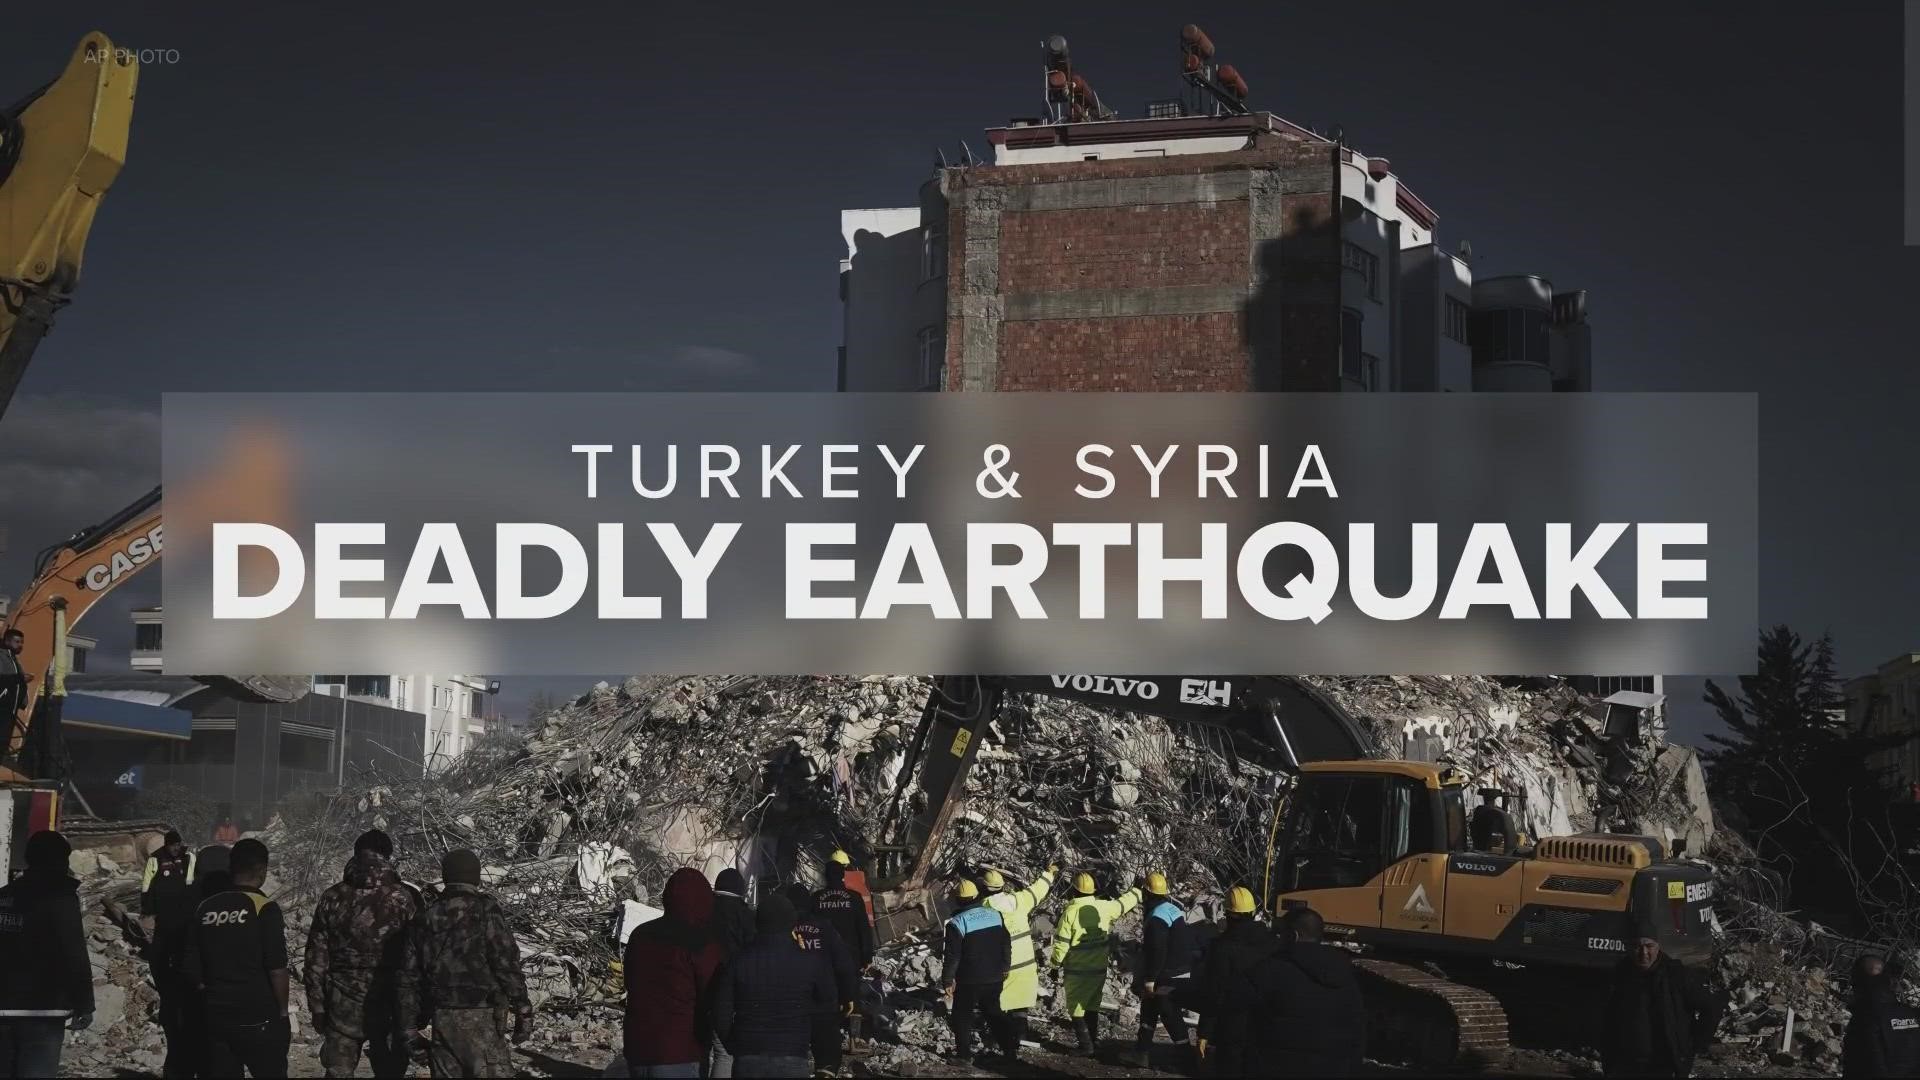 With nearly 6,000 collapsed buildings in Turkey alone, rescuers are spread thin.